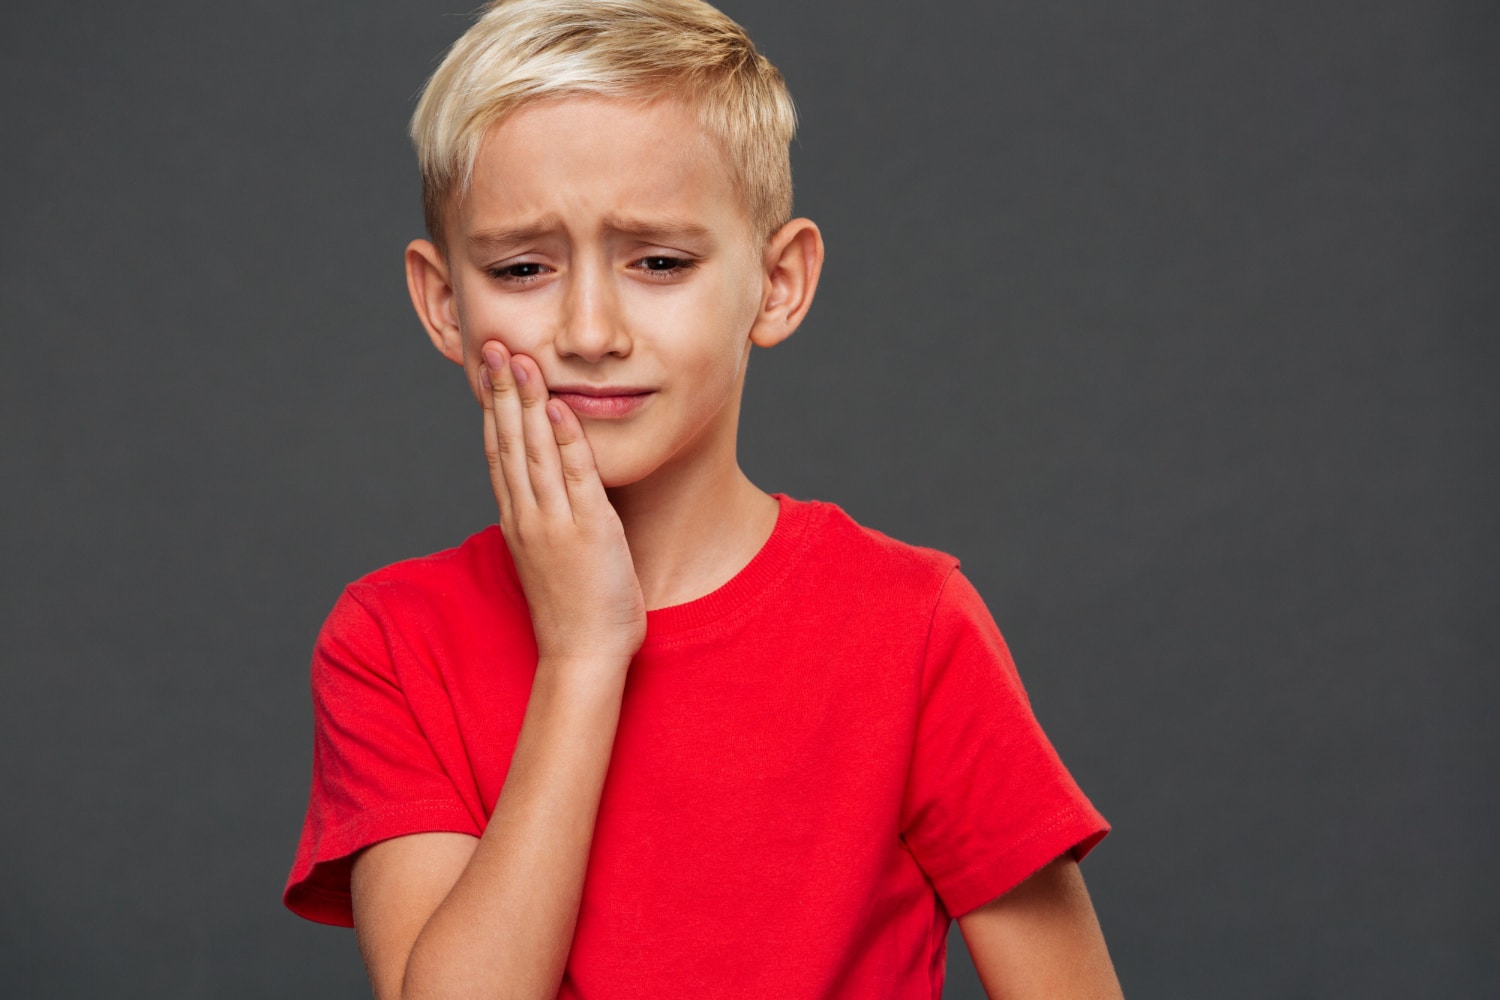 Common Dental issues in kids